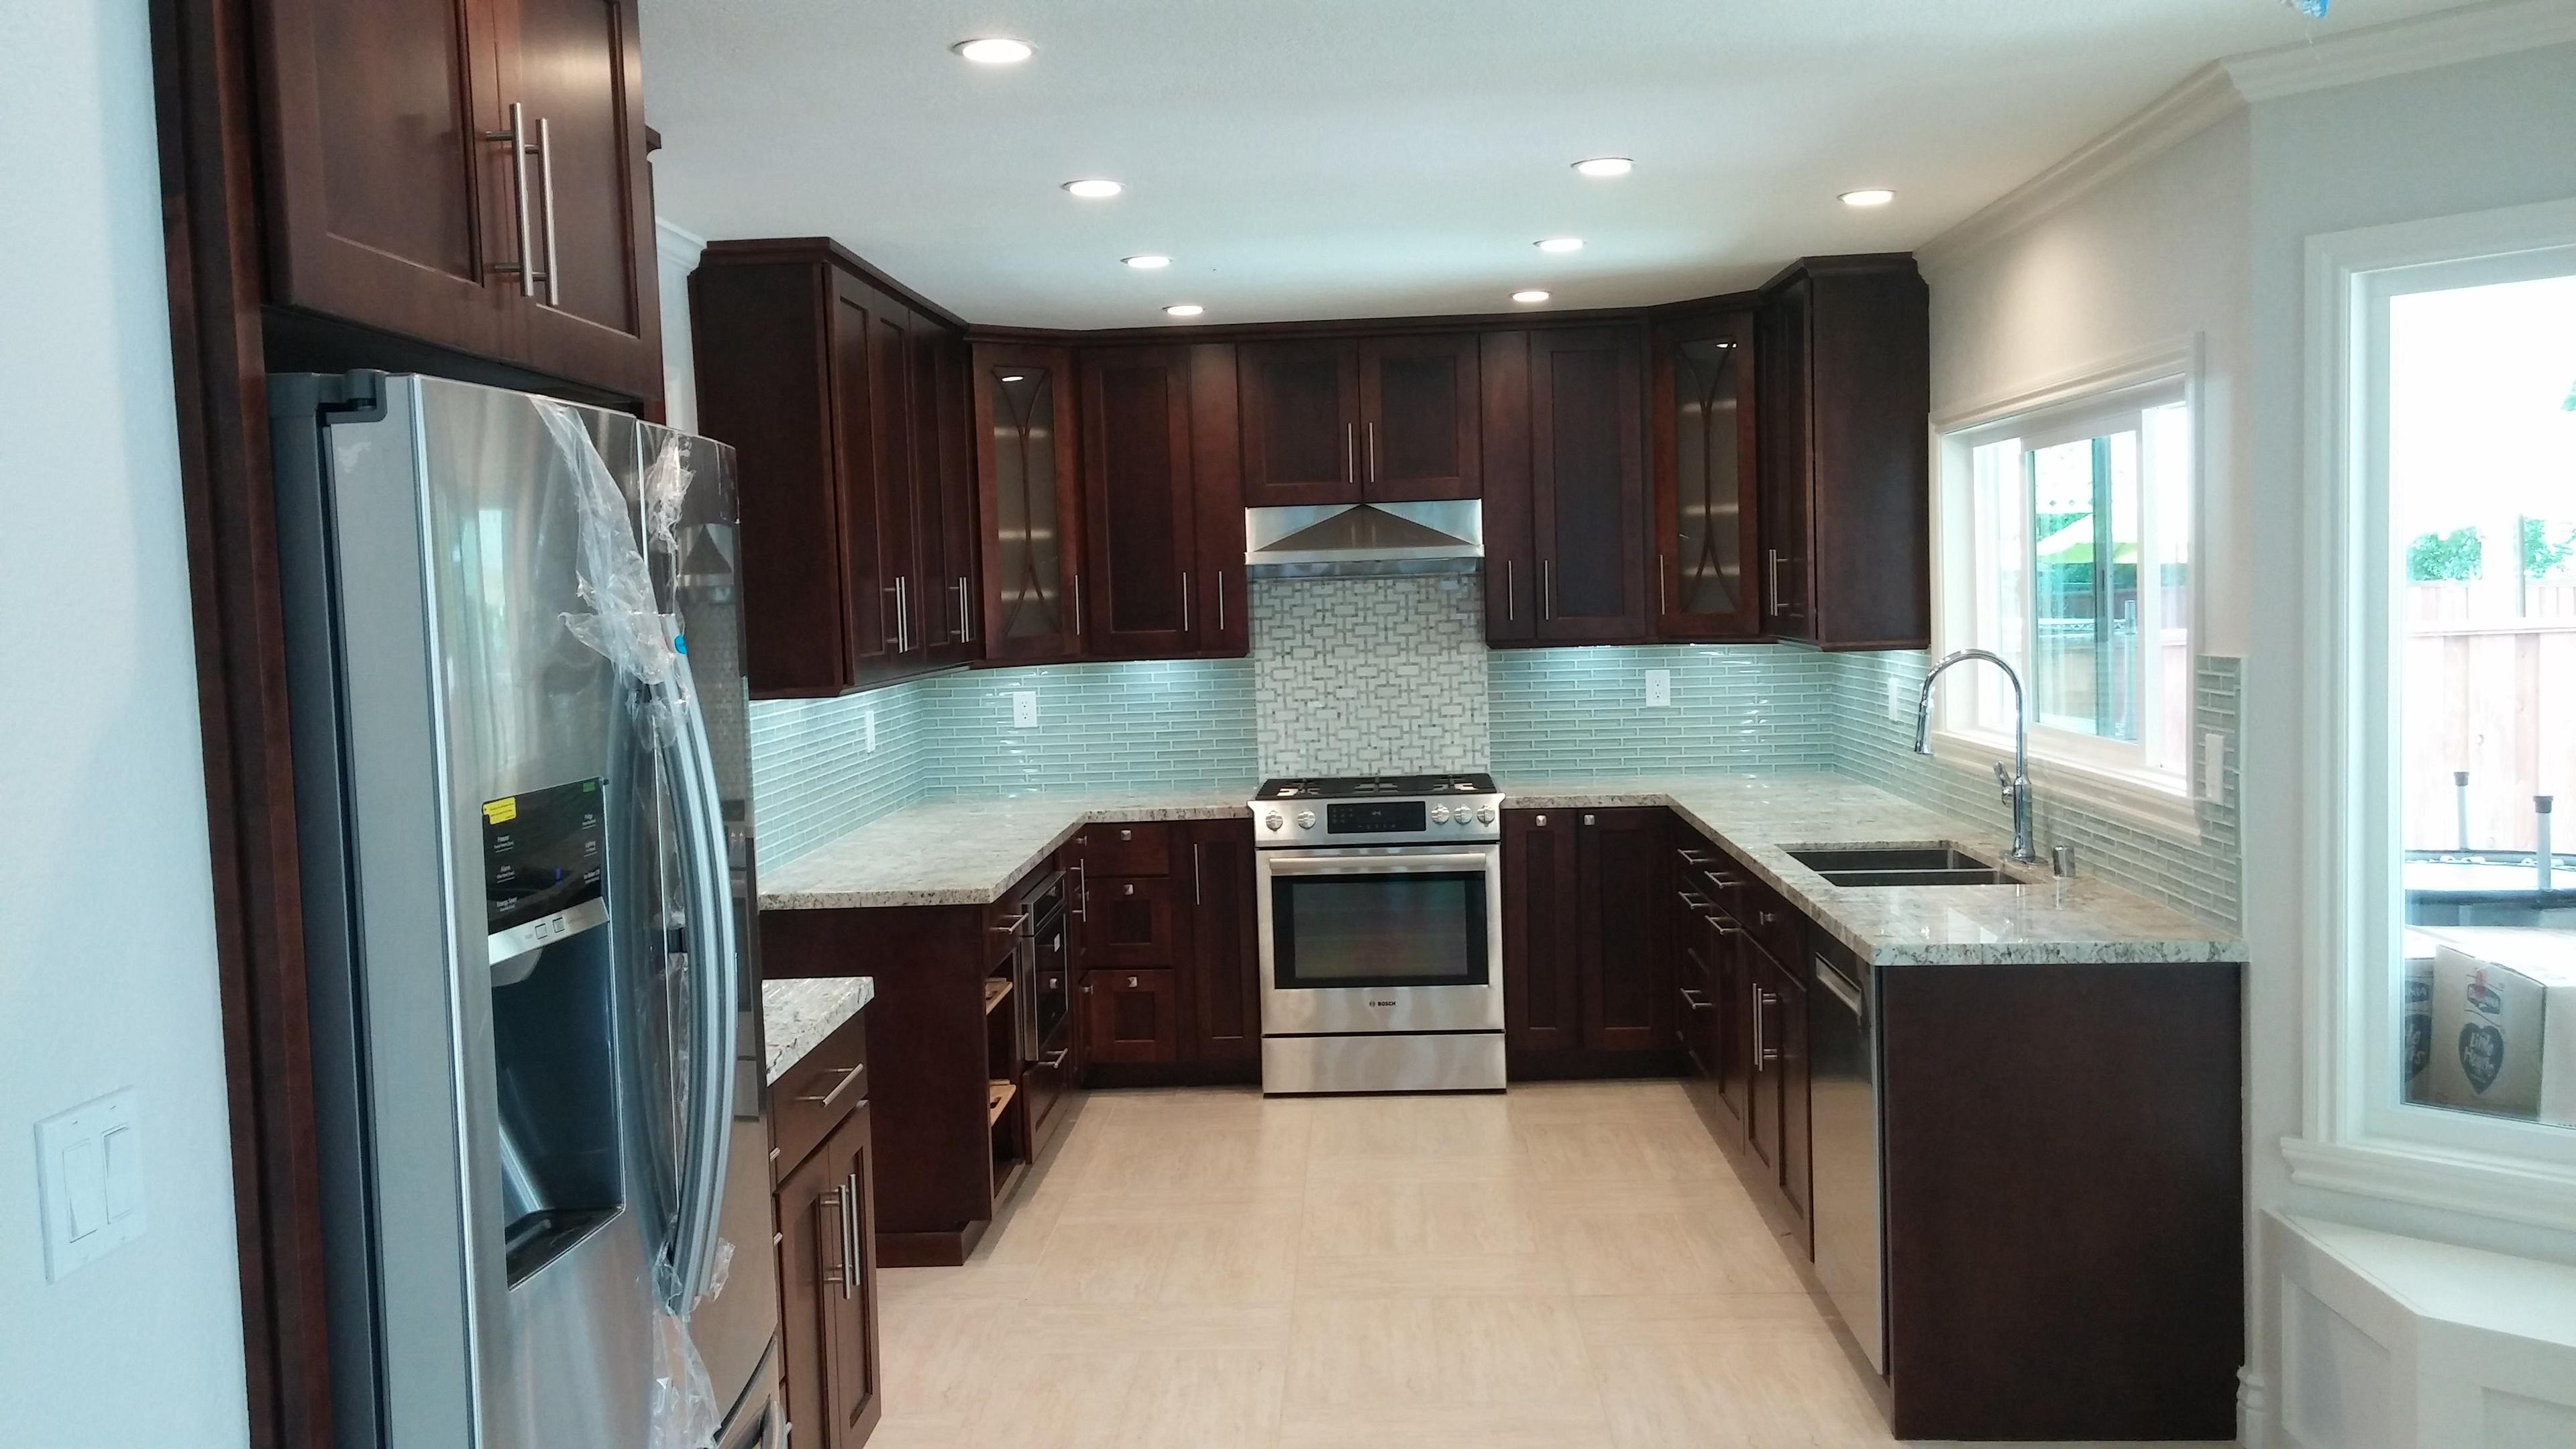 Picture of A recent kitchen remodeling project by East Bay PC Construction - East Bay PC Construction, Inc.